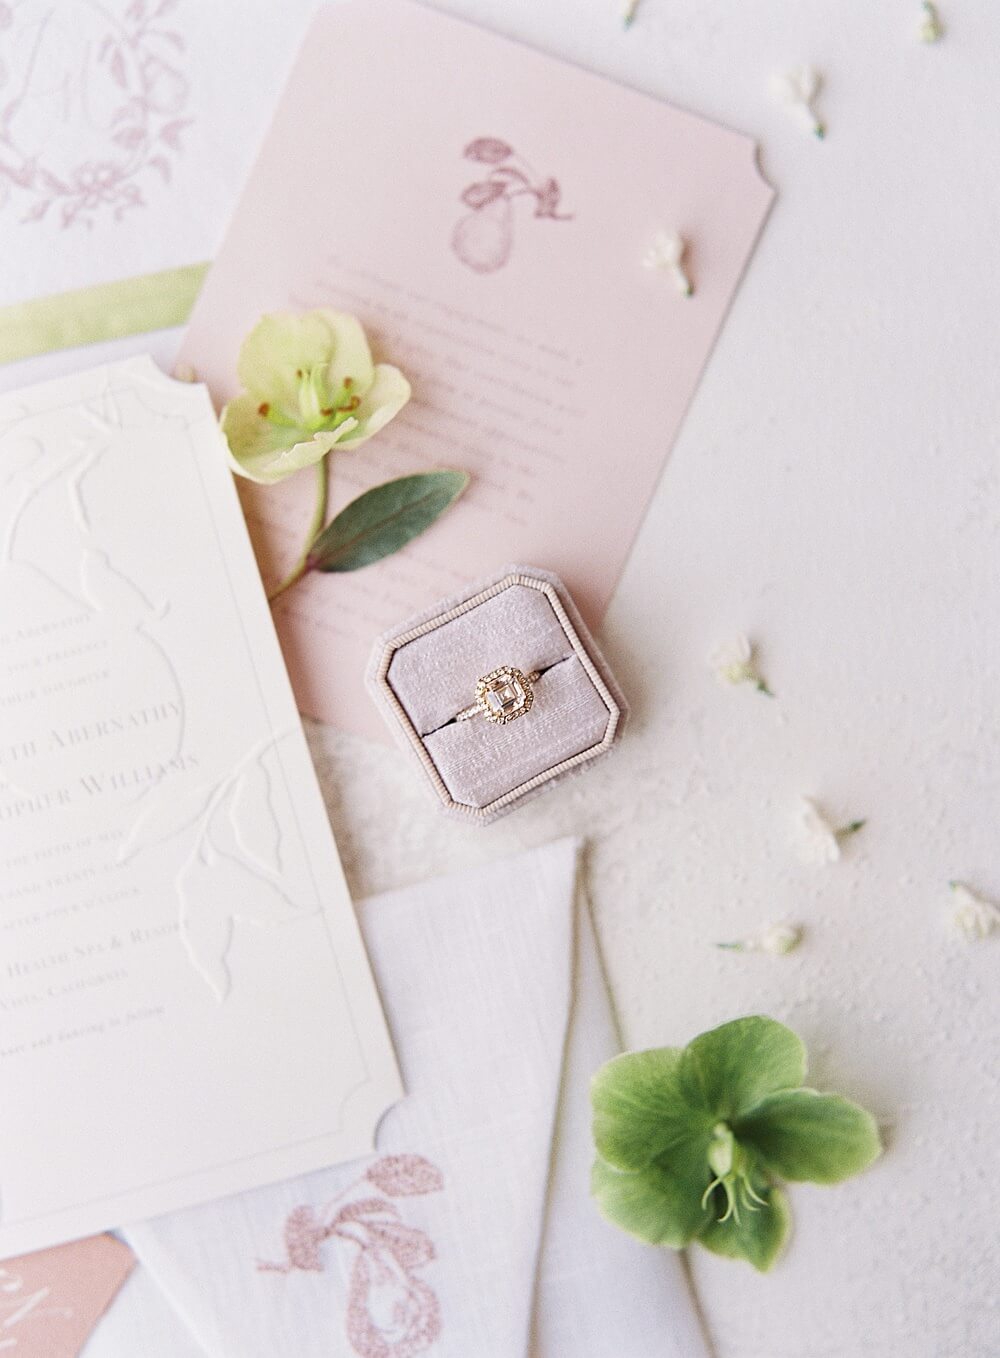 Halo square engagement ring in lavender linen mrs box on white and pink stationary with cream and green hellebore - Jacqueline Benét Photography